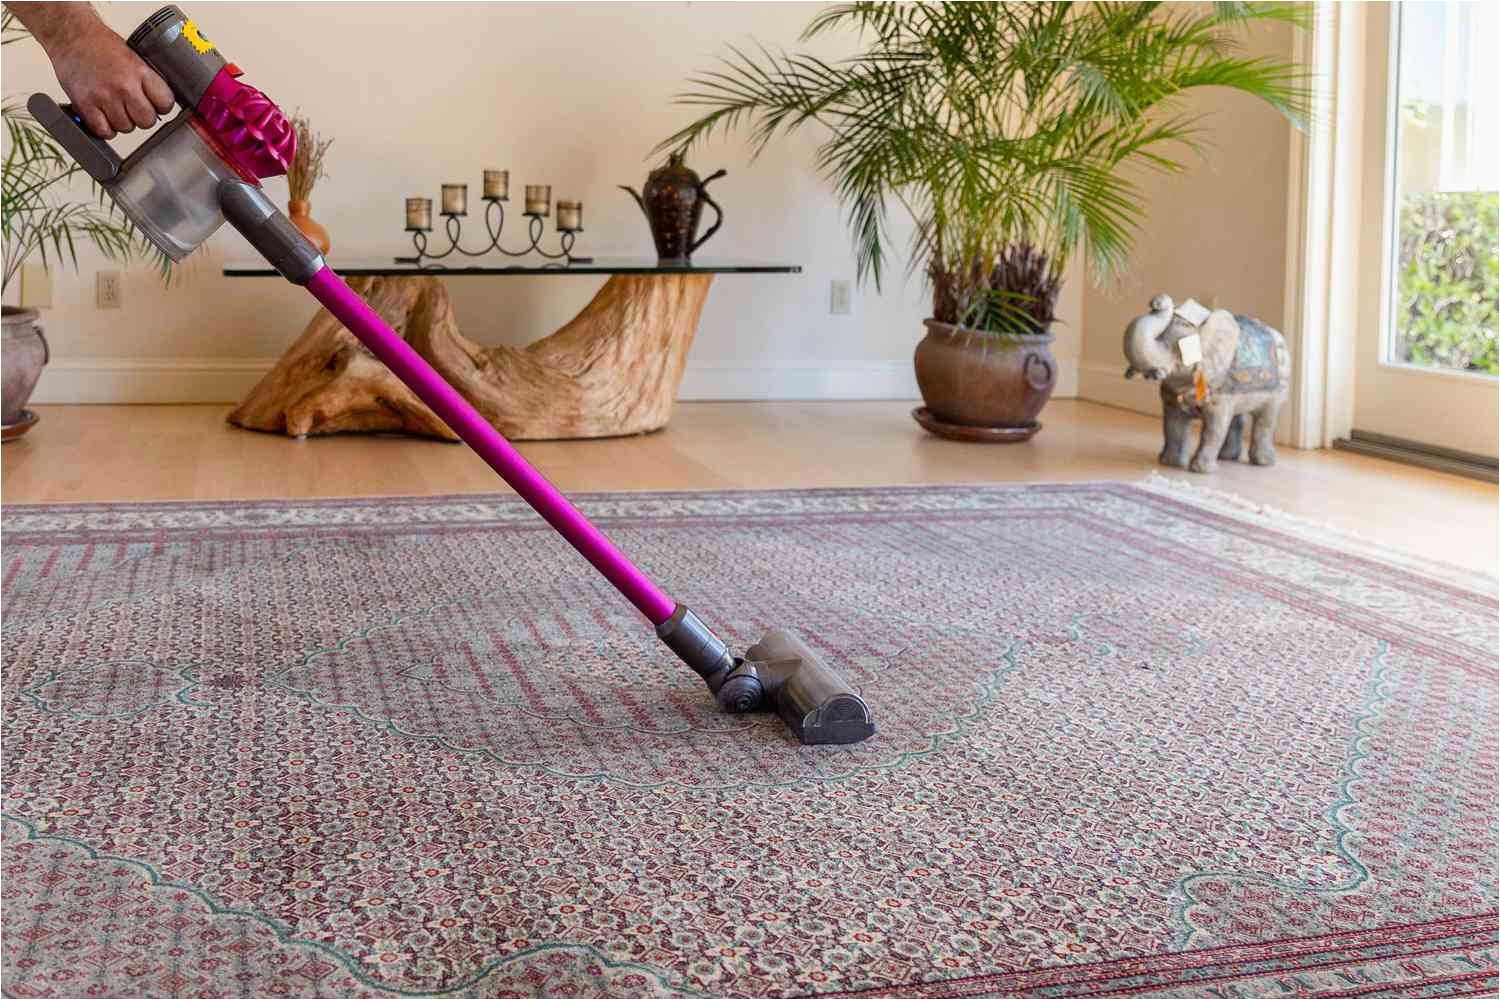 Can You Use Carpet Cleaner On area Rug How to Clean An area Rug